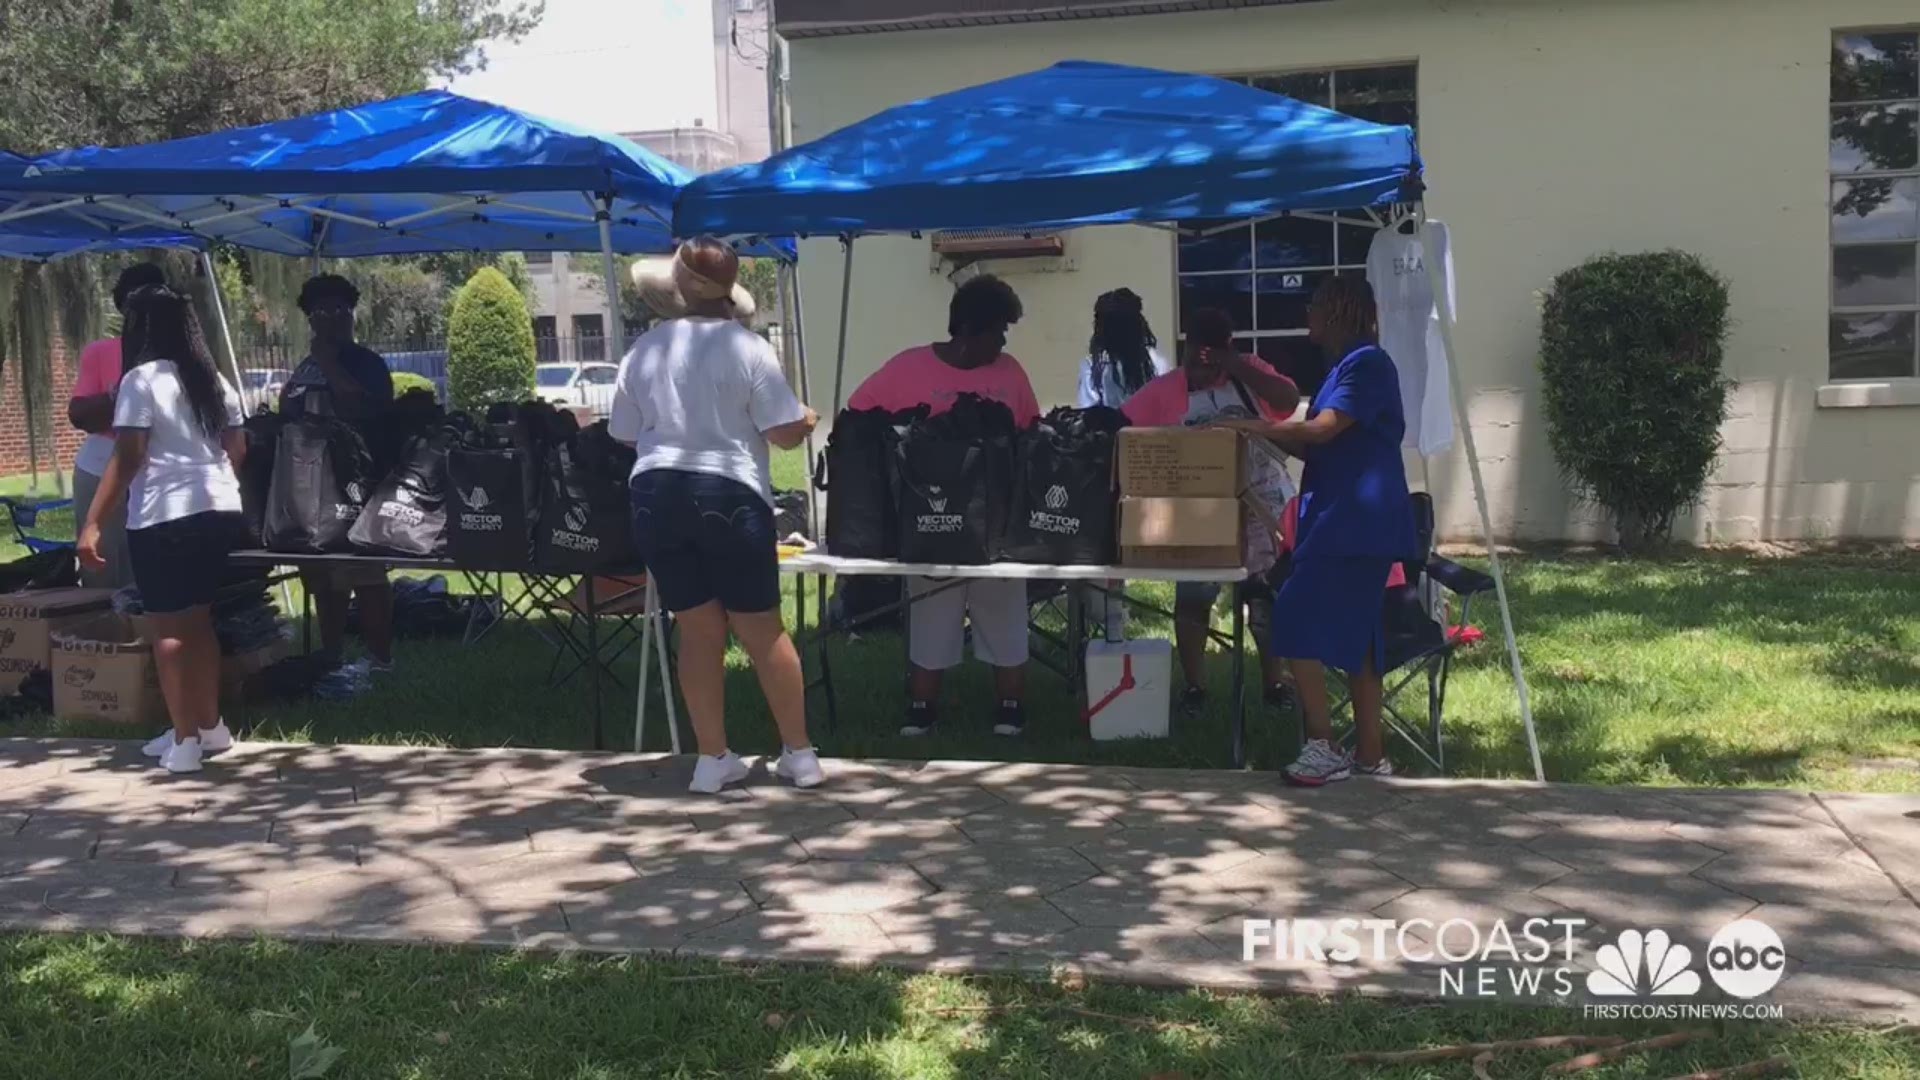 Madison Kirksey created an organization called  #GetBackUpAgain to help fight homelessness in her community. The group held a cookout on Sunday to help feed those in need in the downtown area.